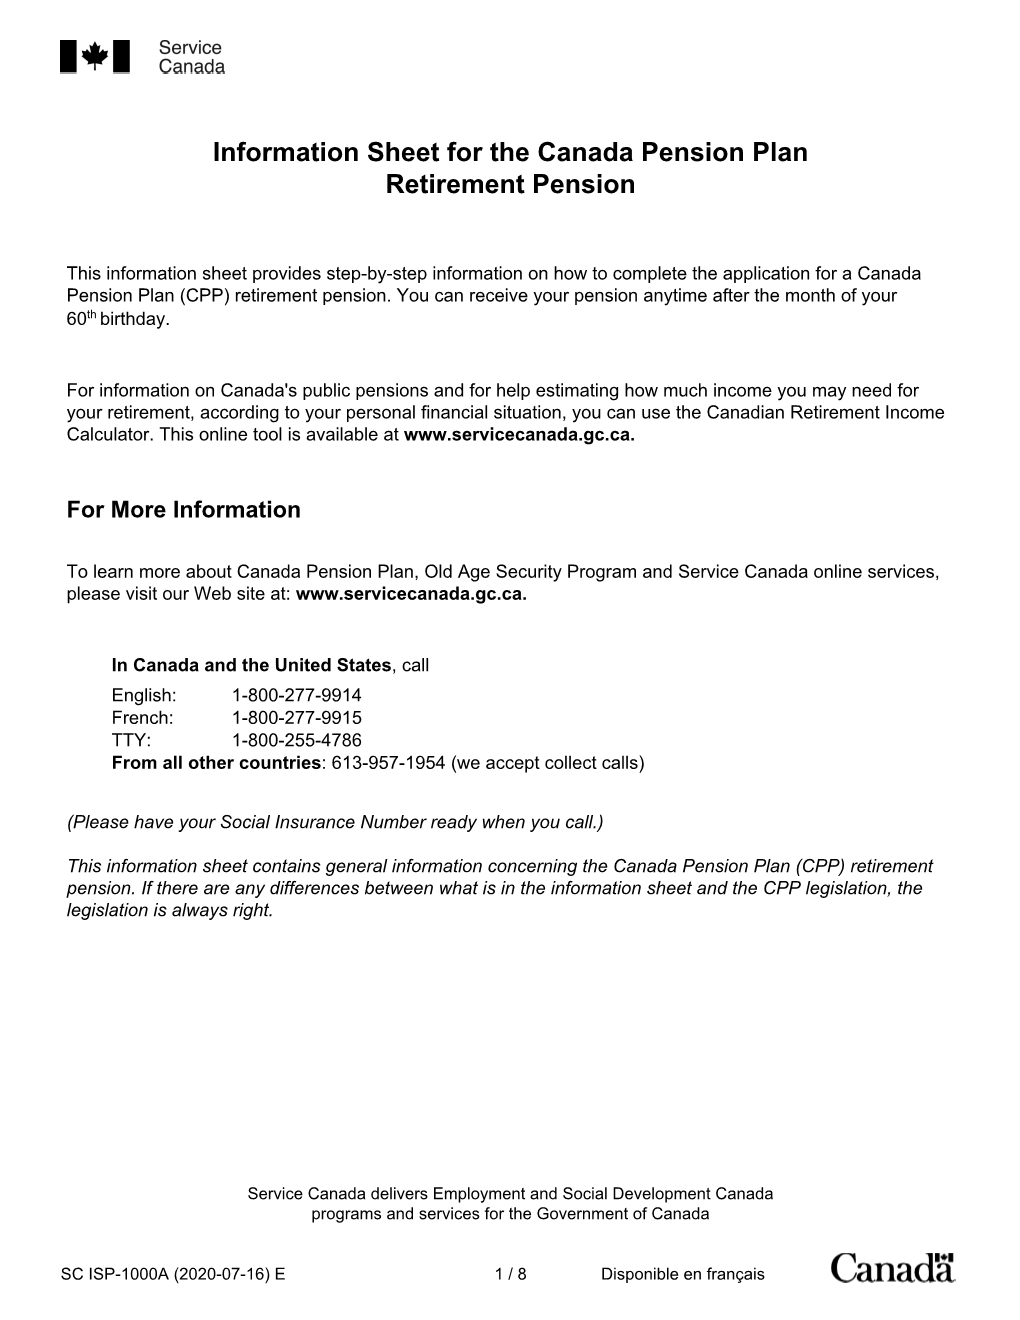 Information Sheet for the Canada Pension Plan Retirement Pension